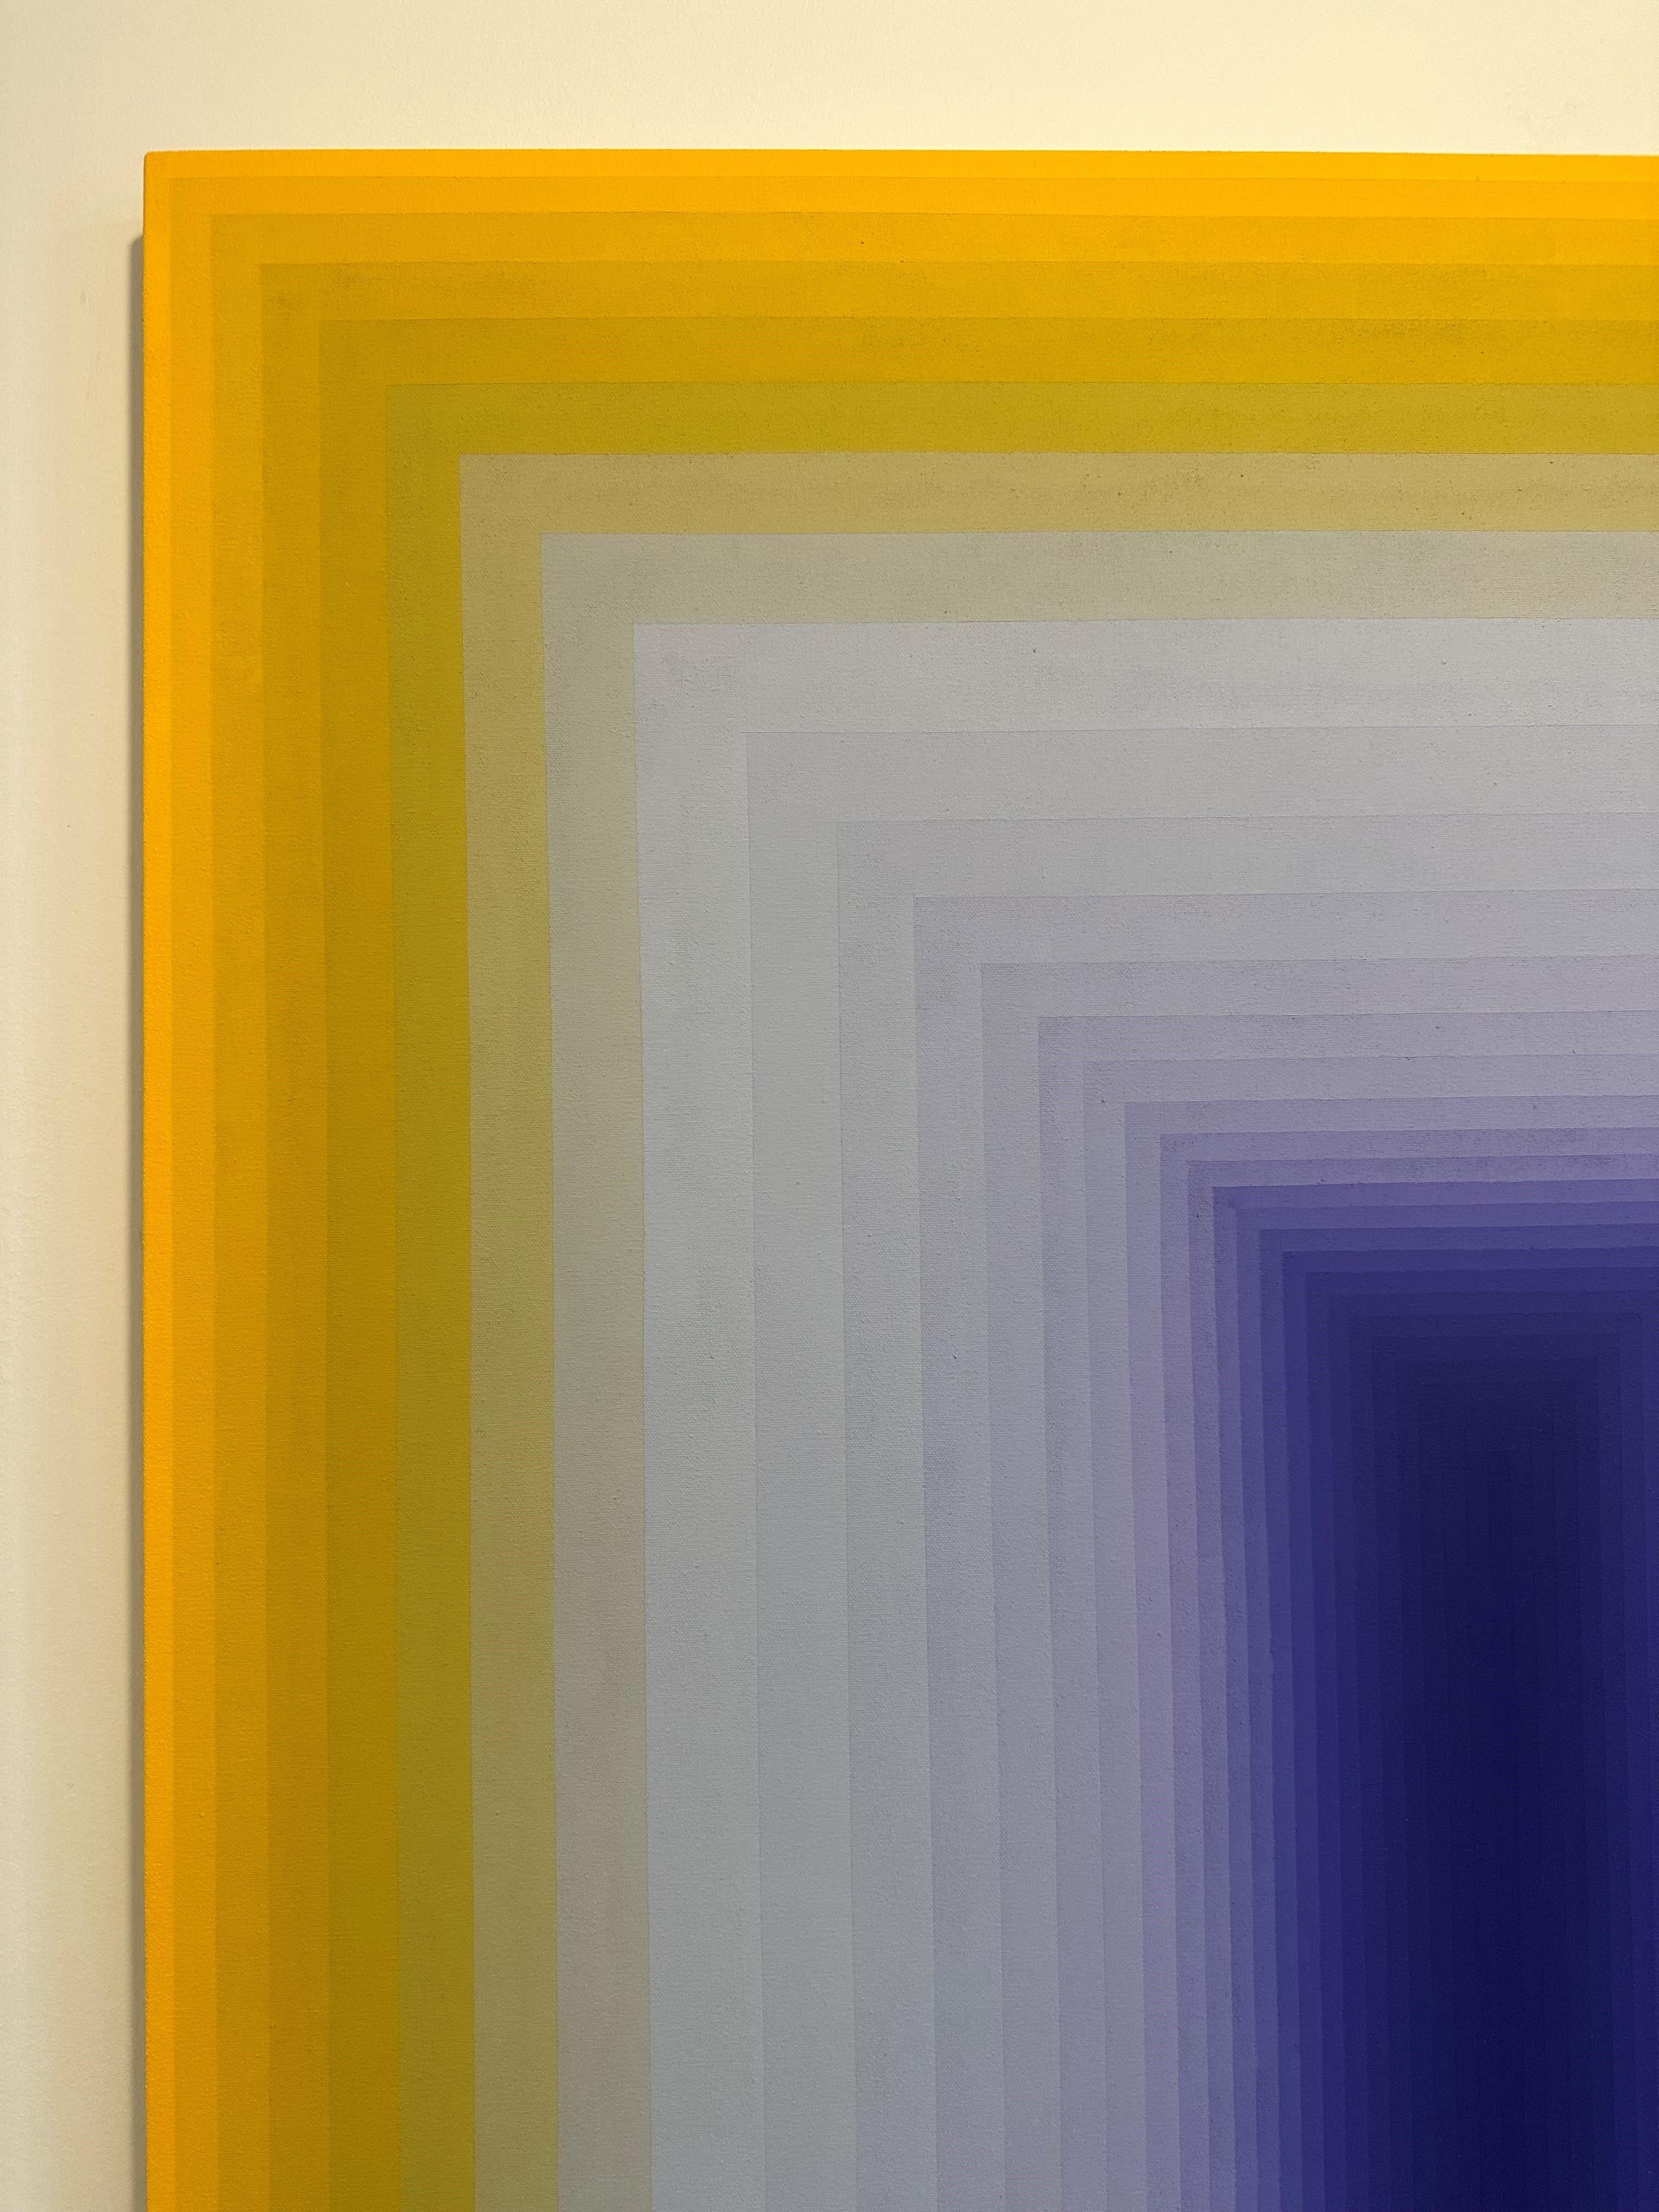 Carefully ordered blocks of color in bright, gradient hues in bright shades of golden yellow and light gray surround a deep, dark violet center. Signed, dated and titled on the verso.

Audrey Stone has spent her lifetime being fascinated with color